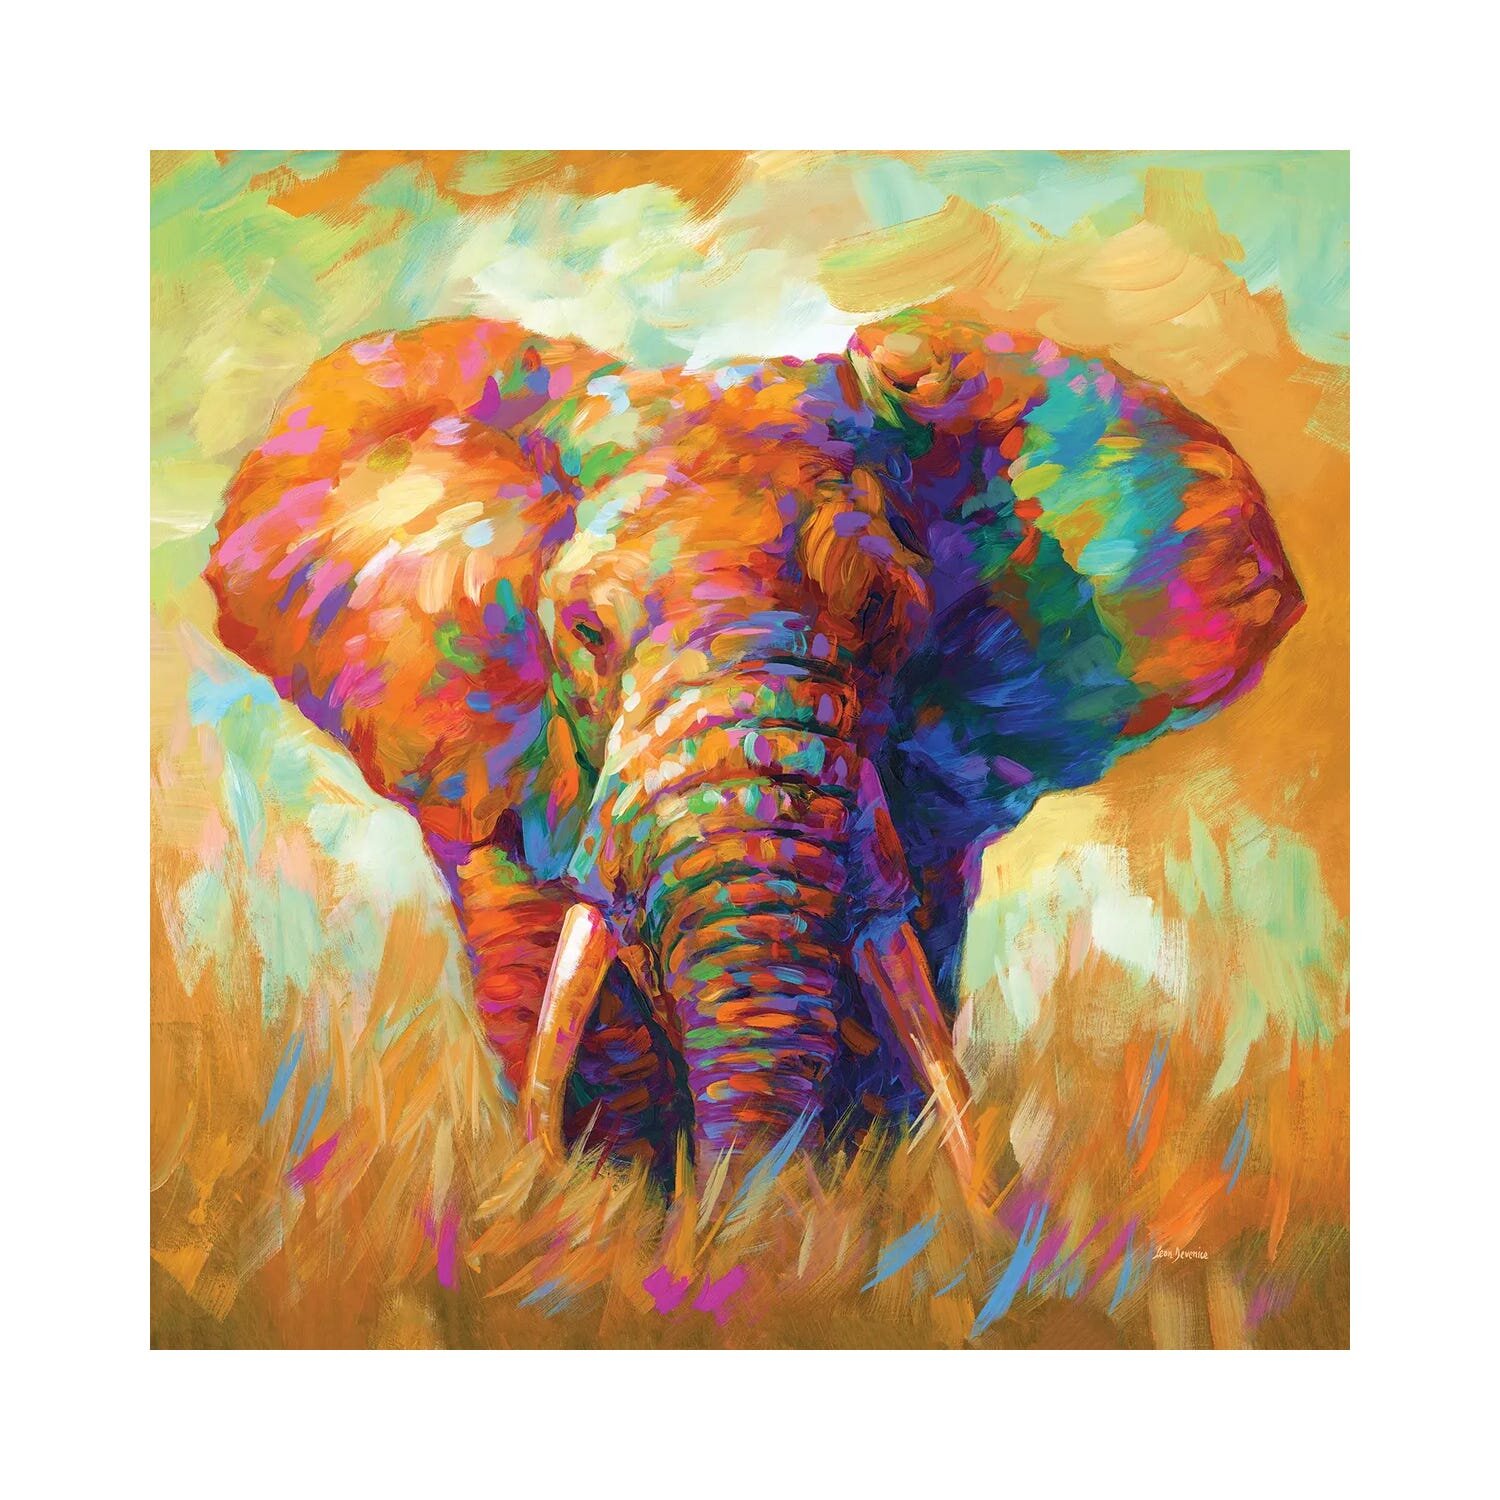 Elephant Art Canvas Painting - Elephant Painting for Sale